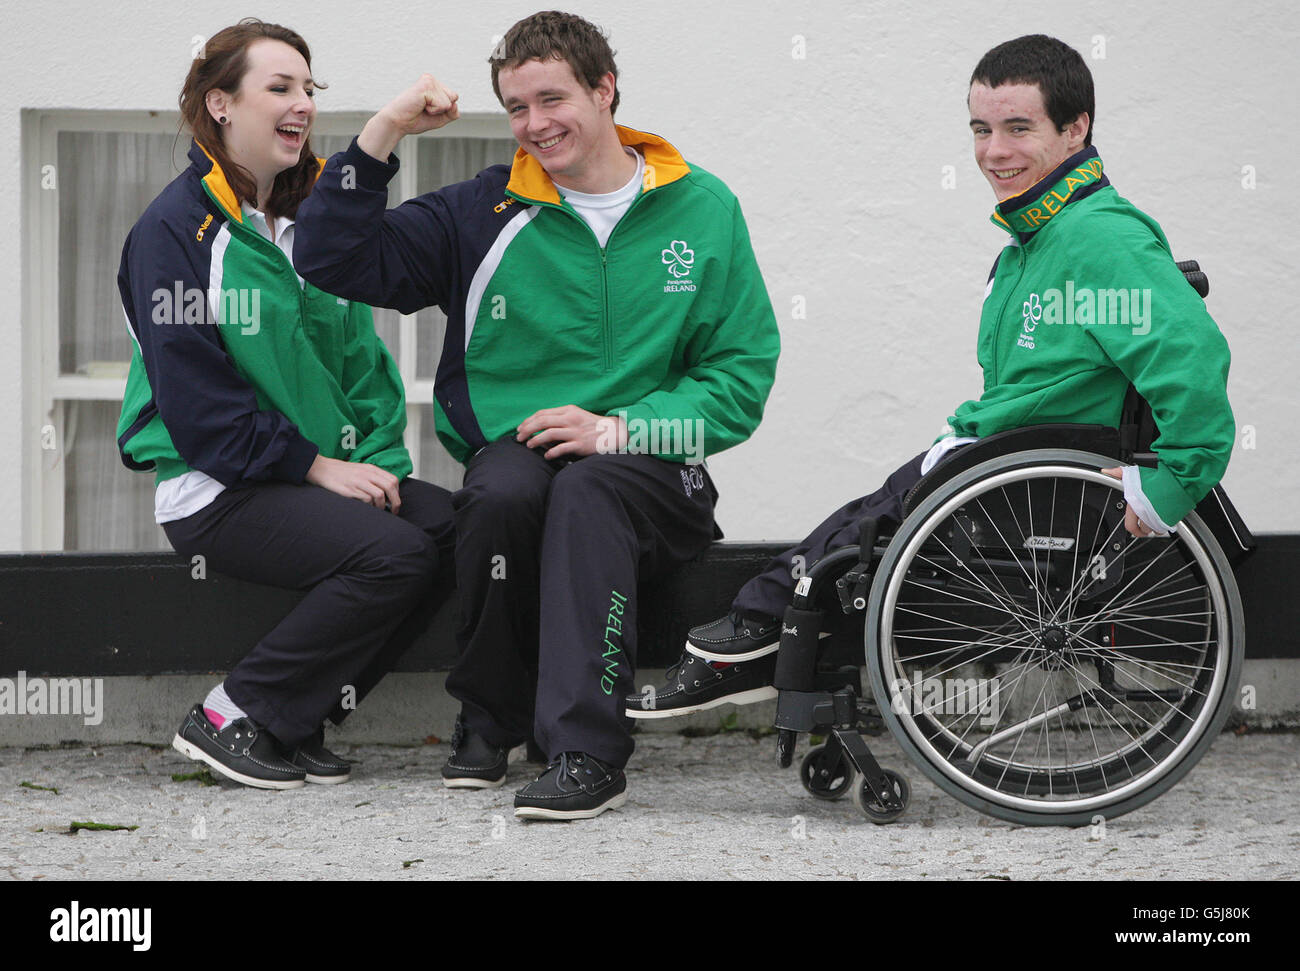 Paralympics - Reception for Irish Participants in the Paralympic Games Stock Photo